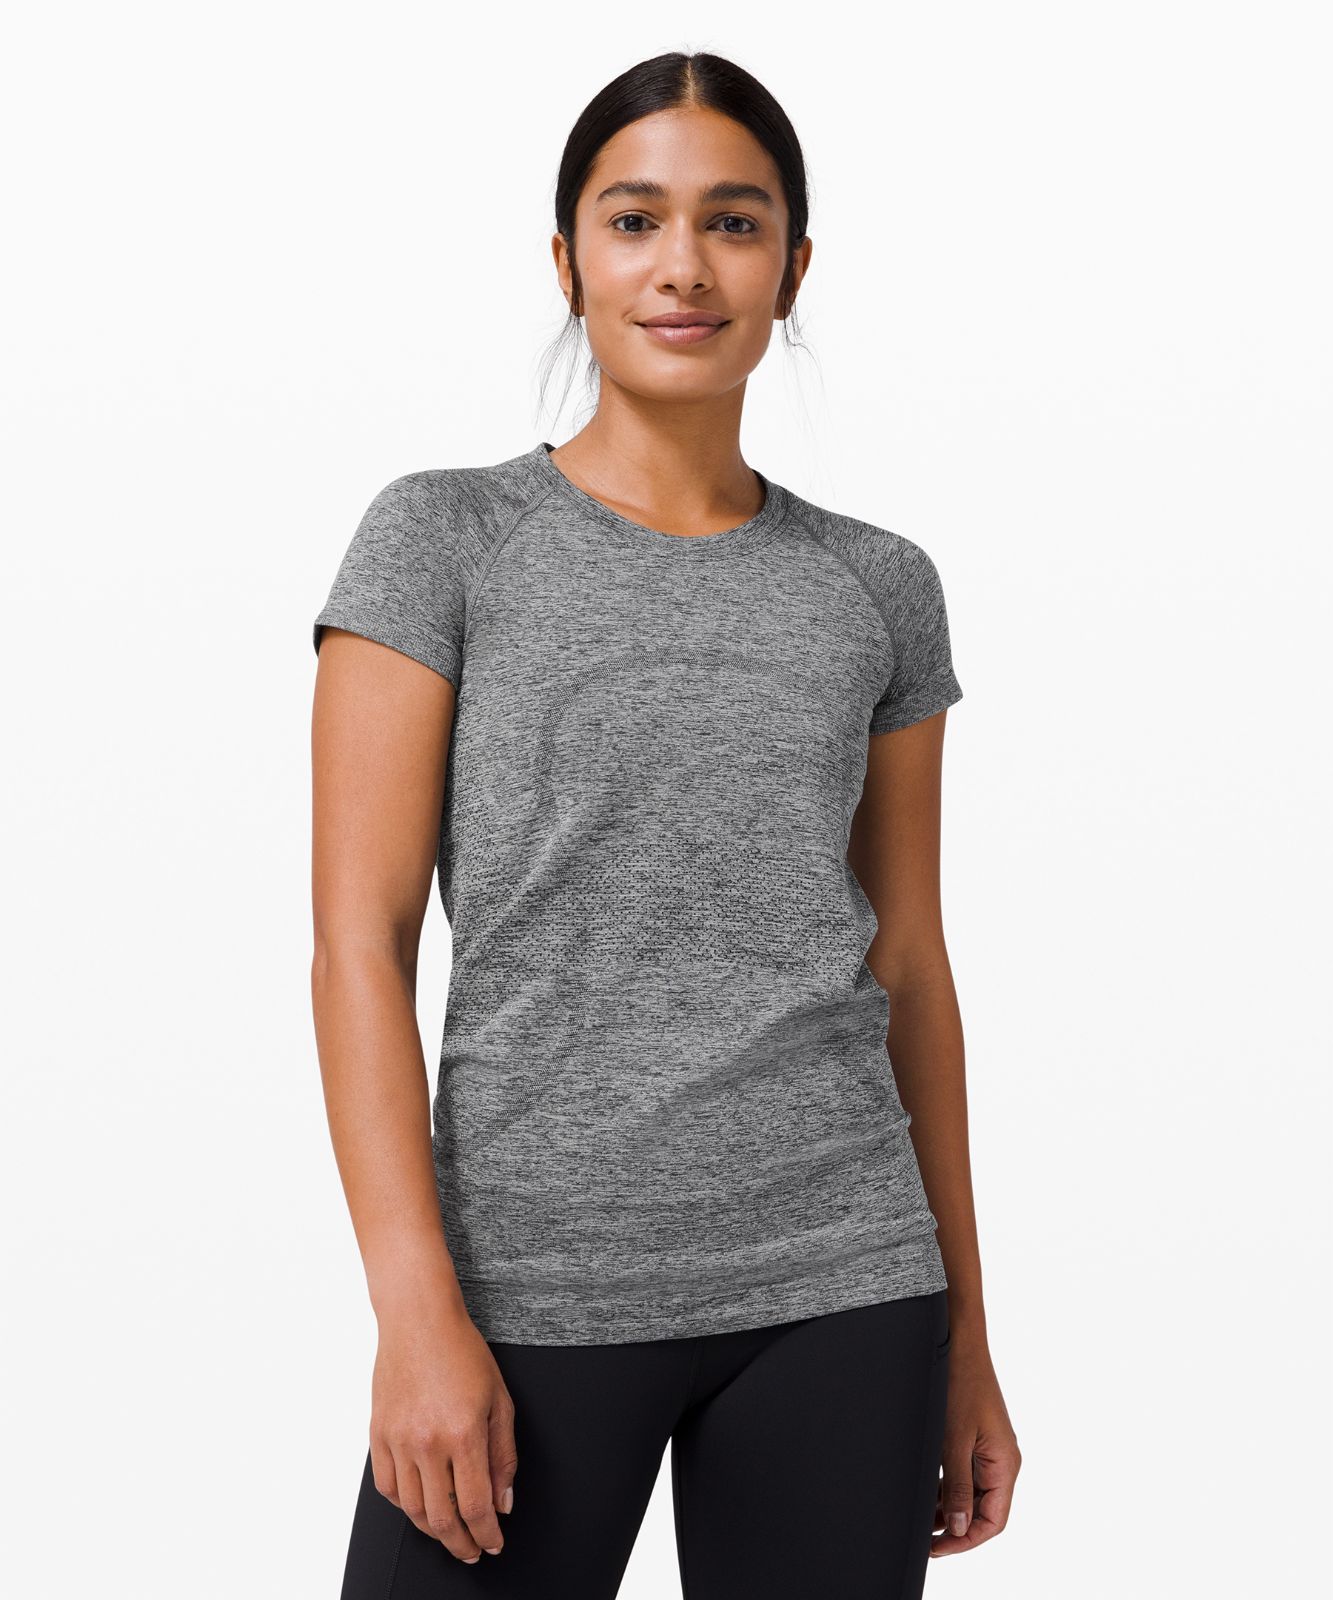 Workout Staples for 2019: My lululemon Swiftly Tech Love Affair